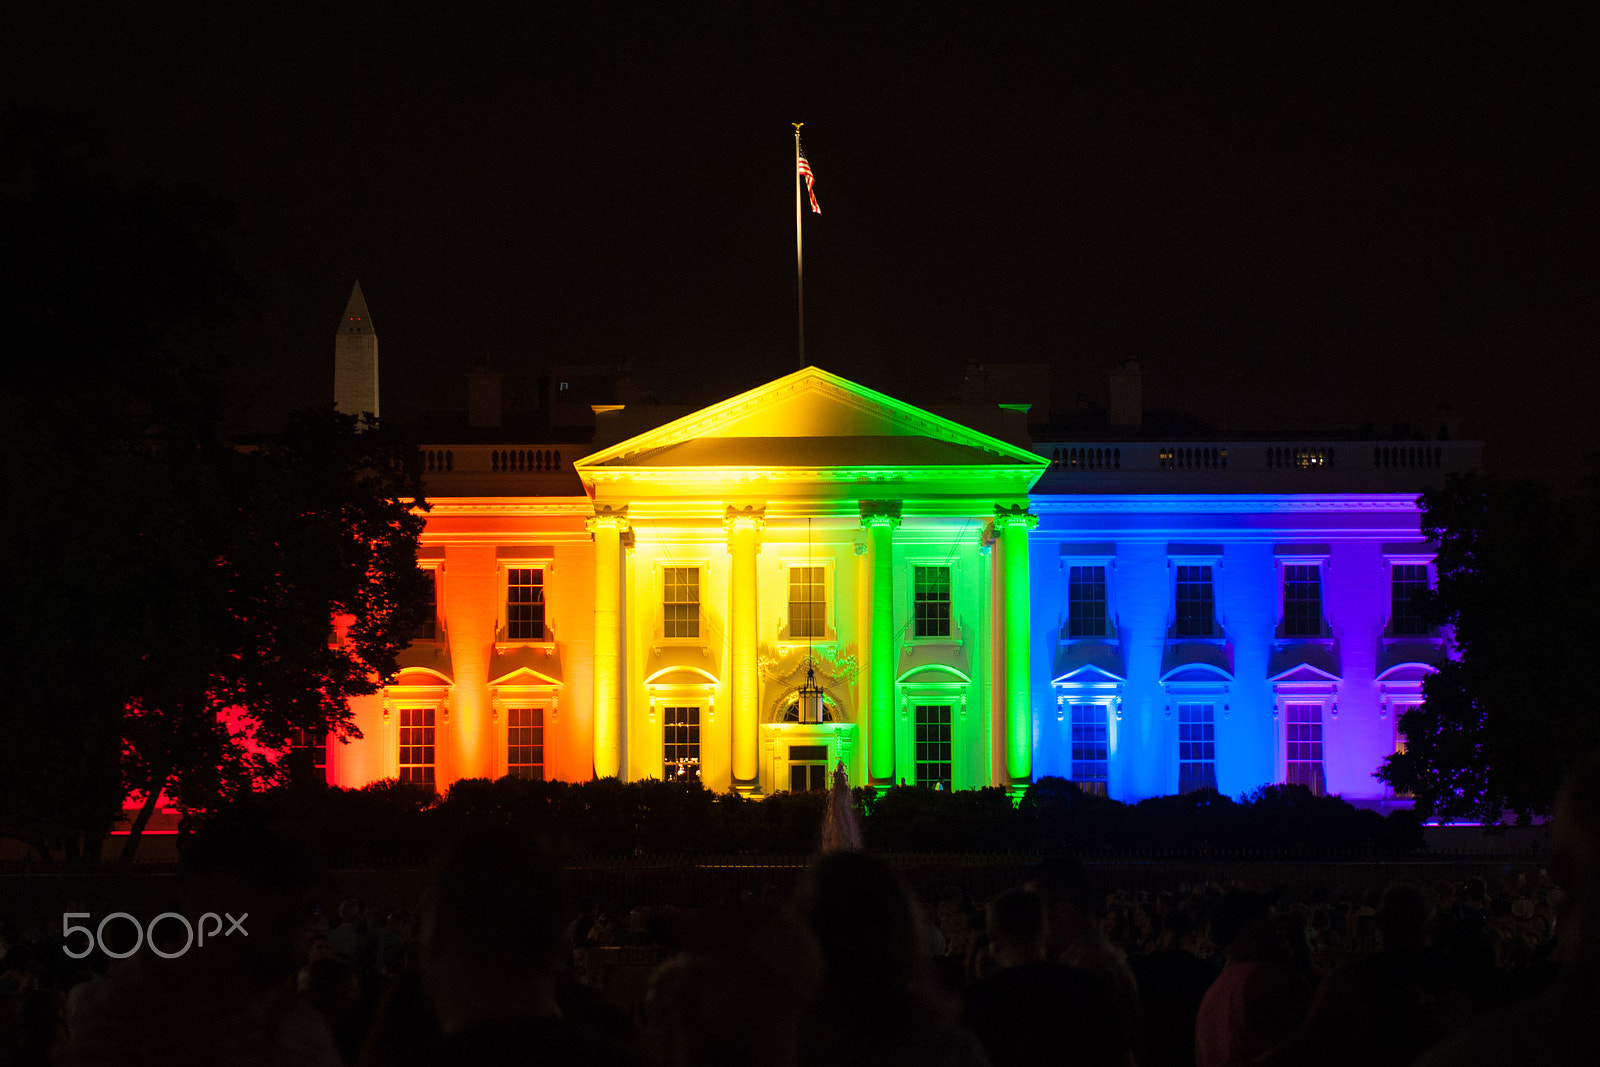 Nikon D700 sample photo. White house lit in rainbow colors photography